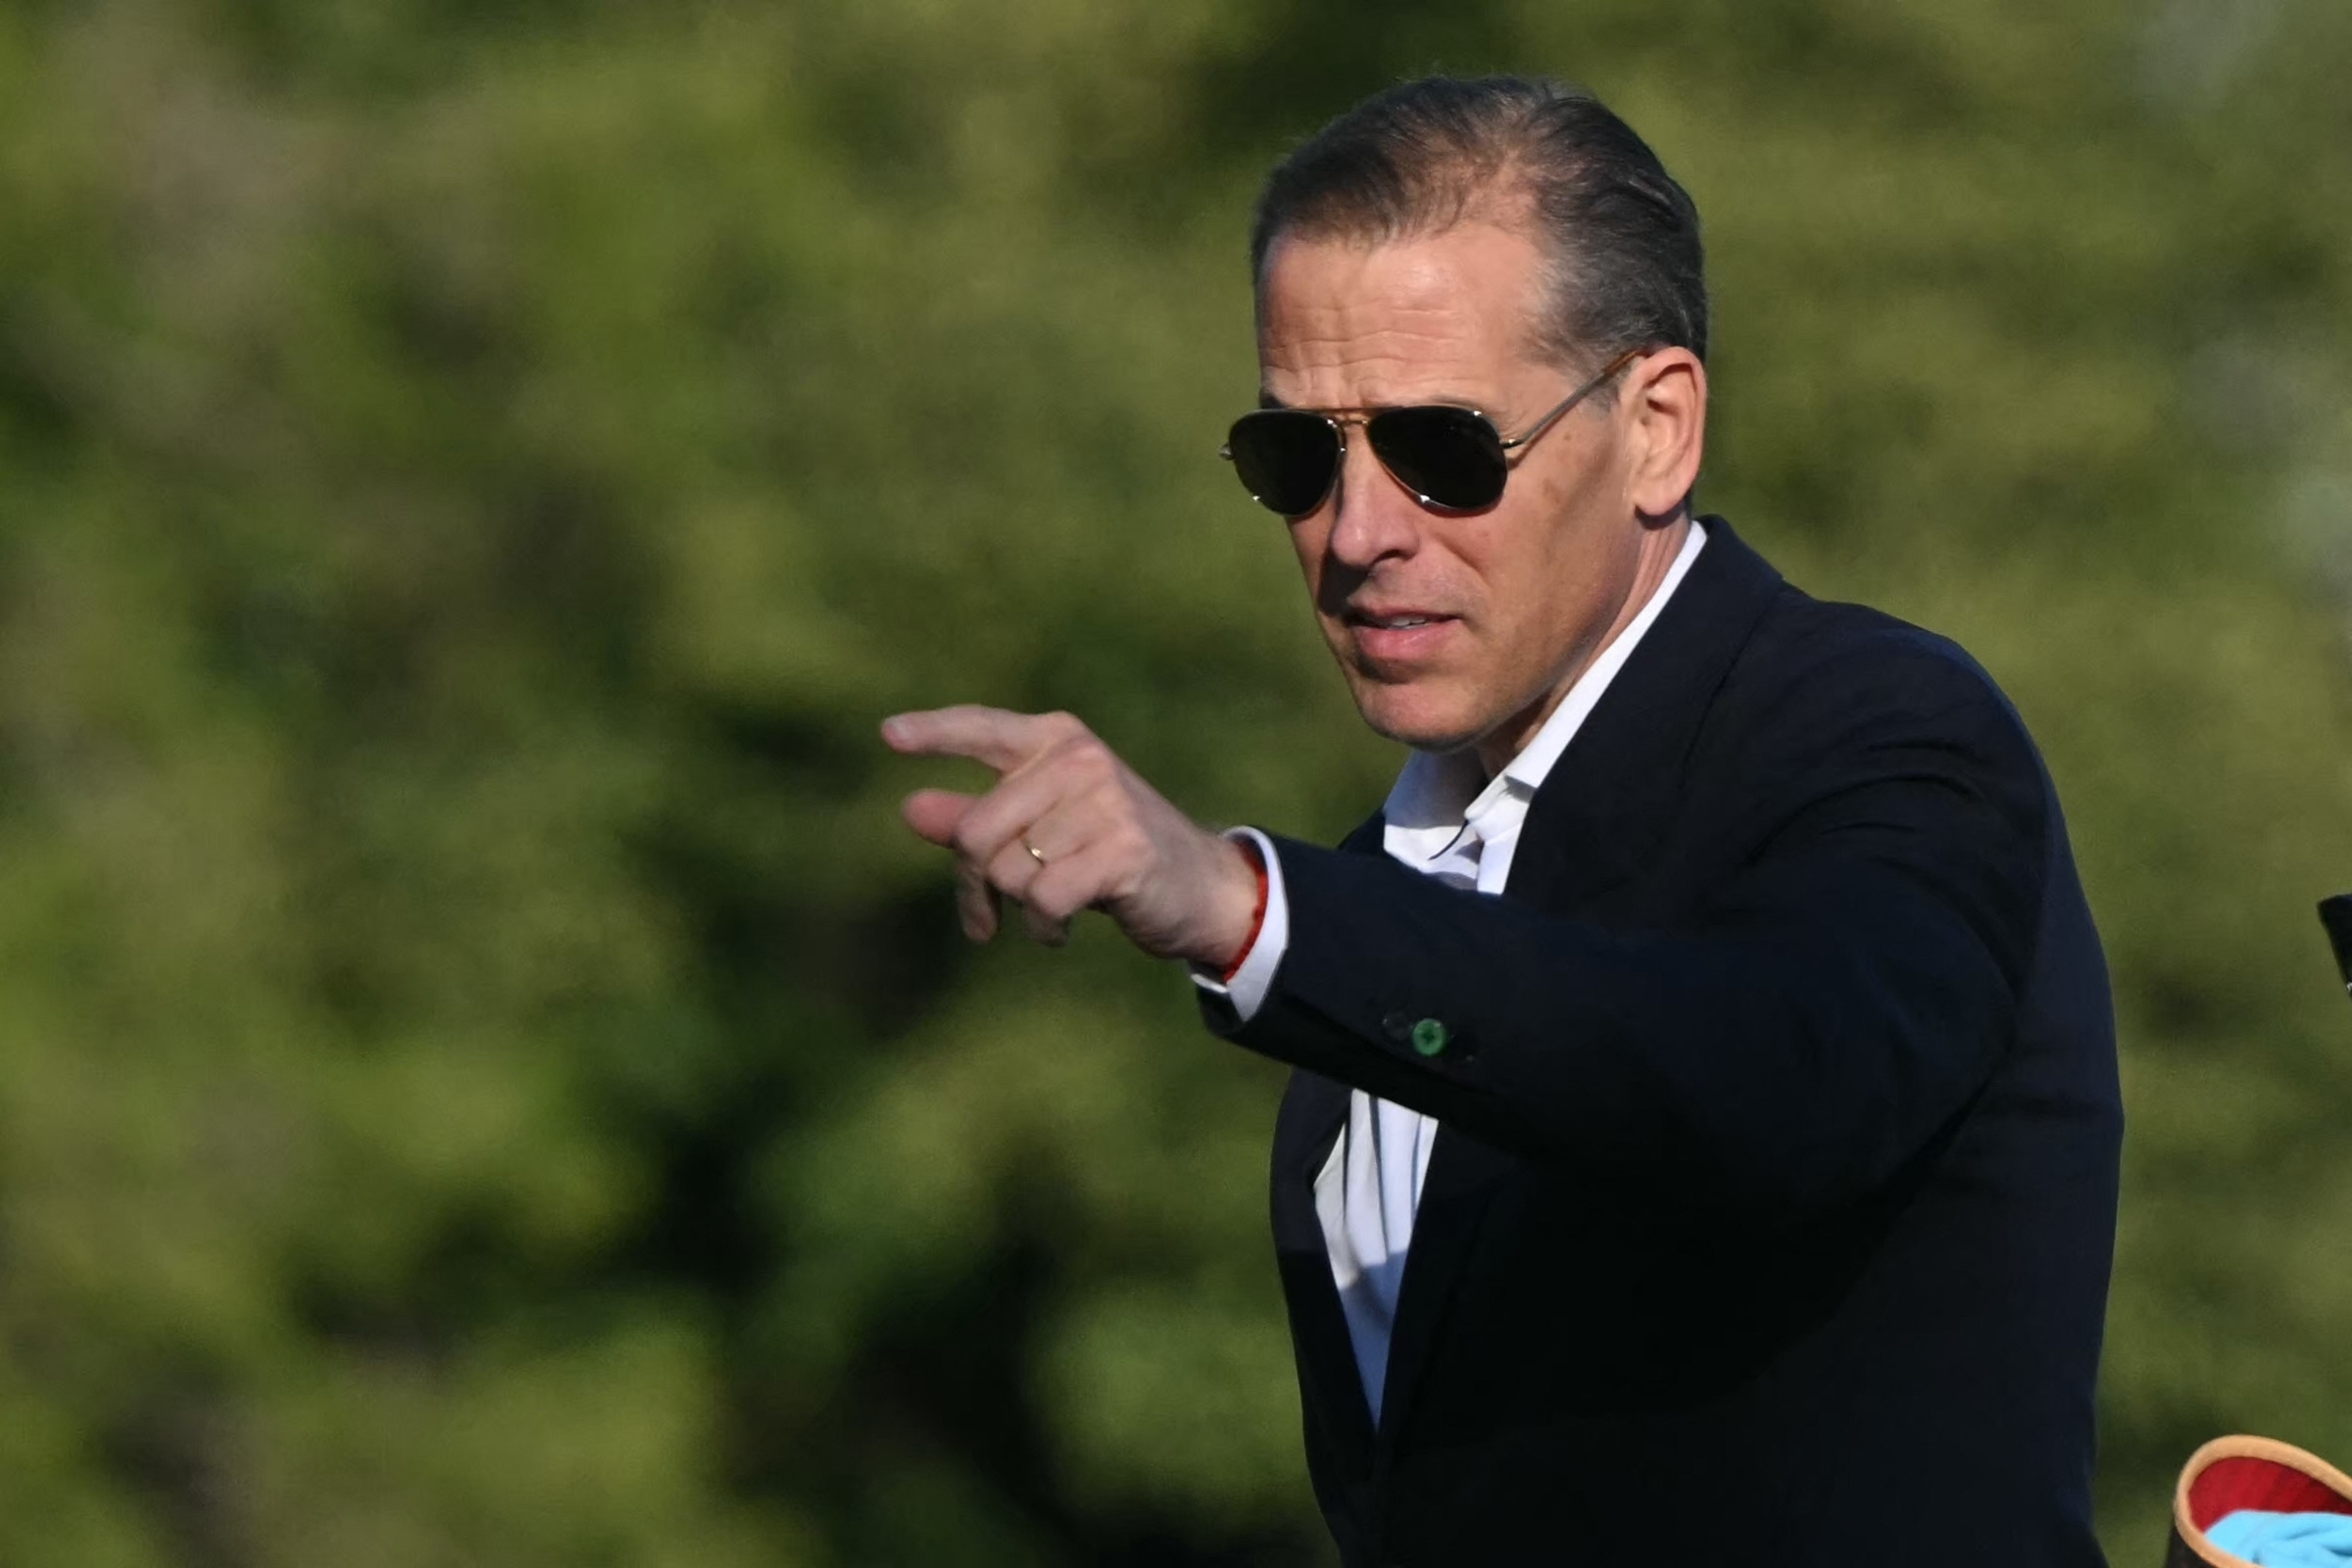 Hunter Biden is pointing, wearing a dark suit and sunglasses against a blurred outdoor background